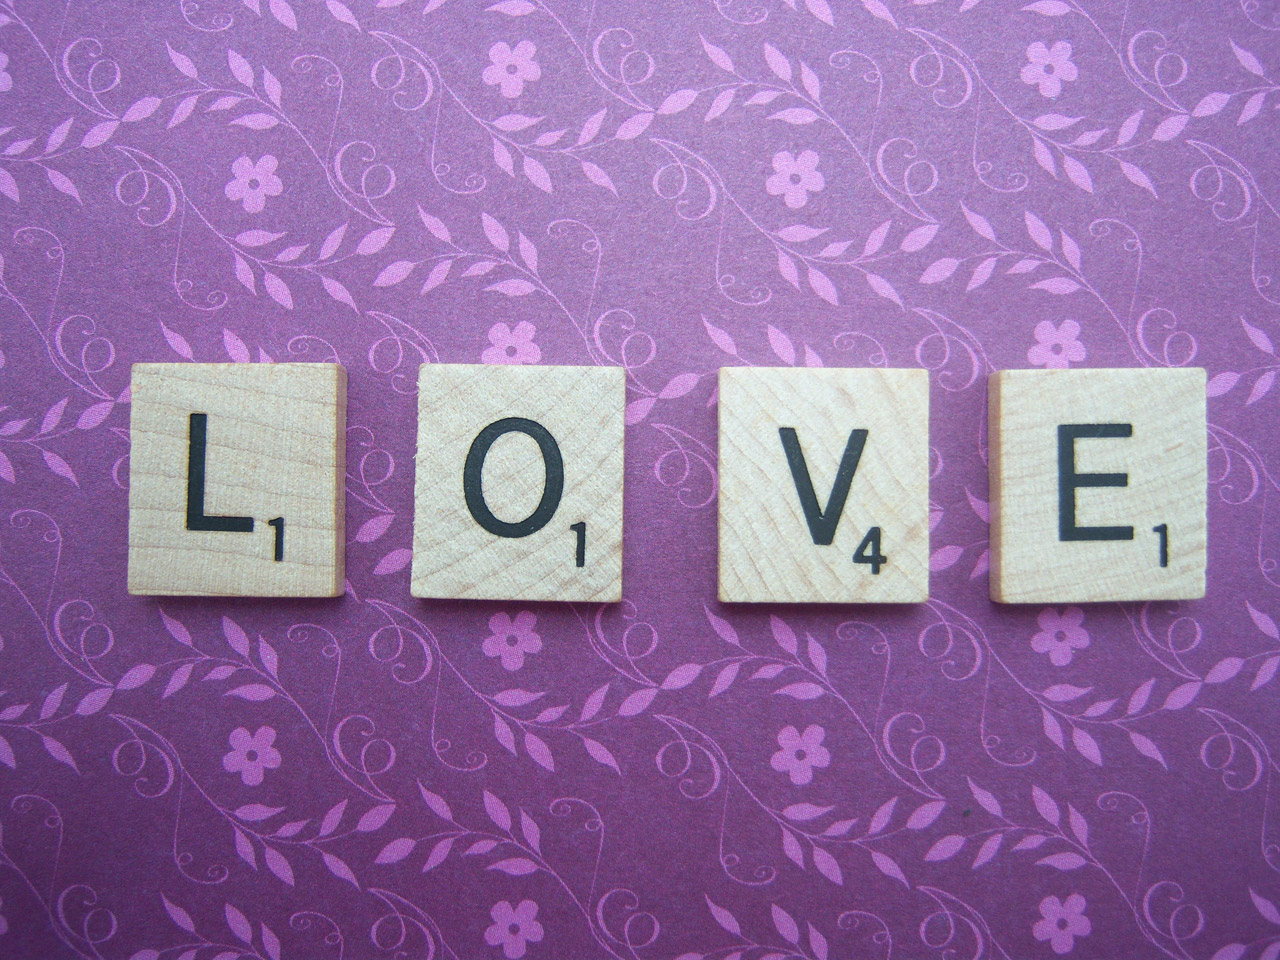 Scrabble Tiles are used to spell LOVE.